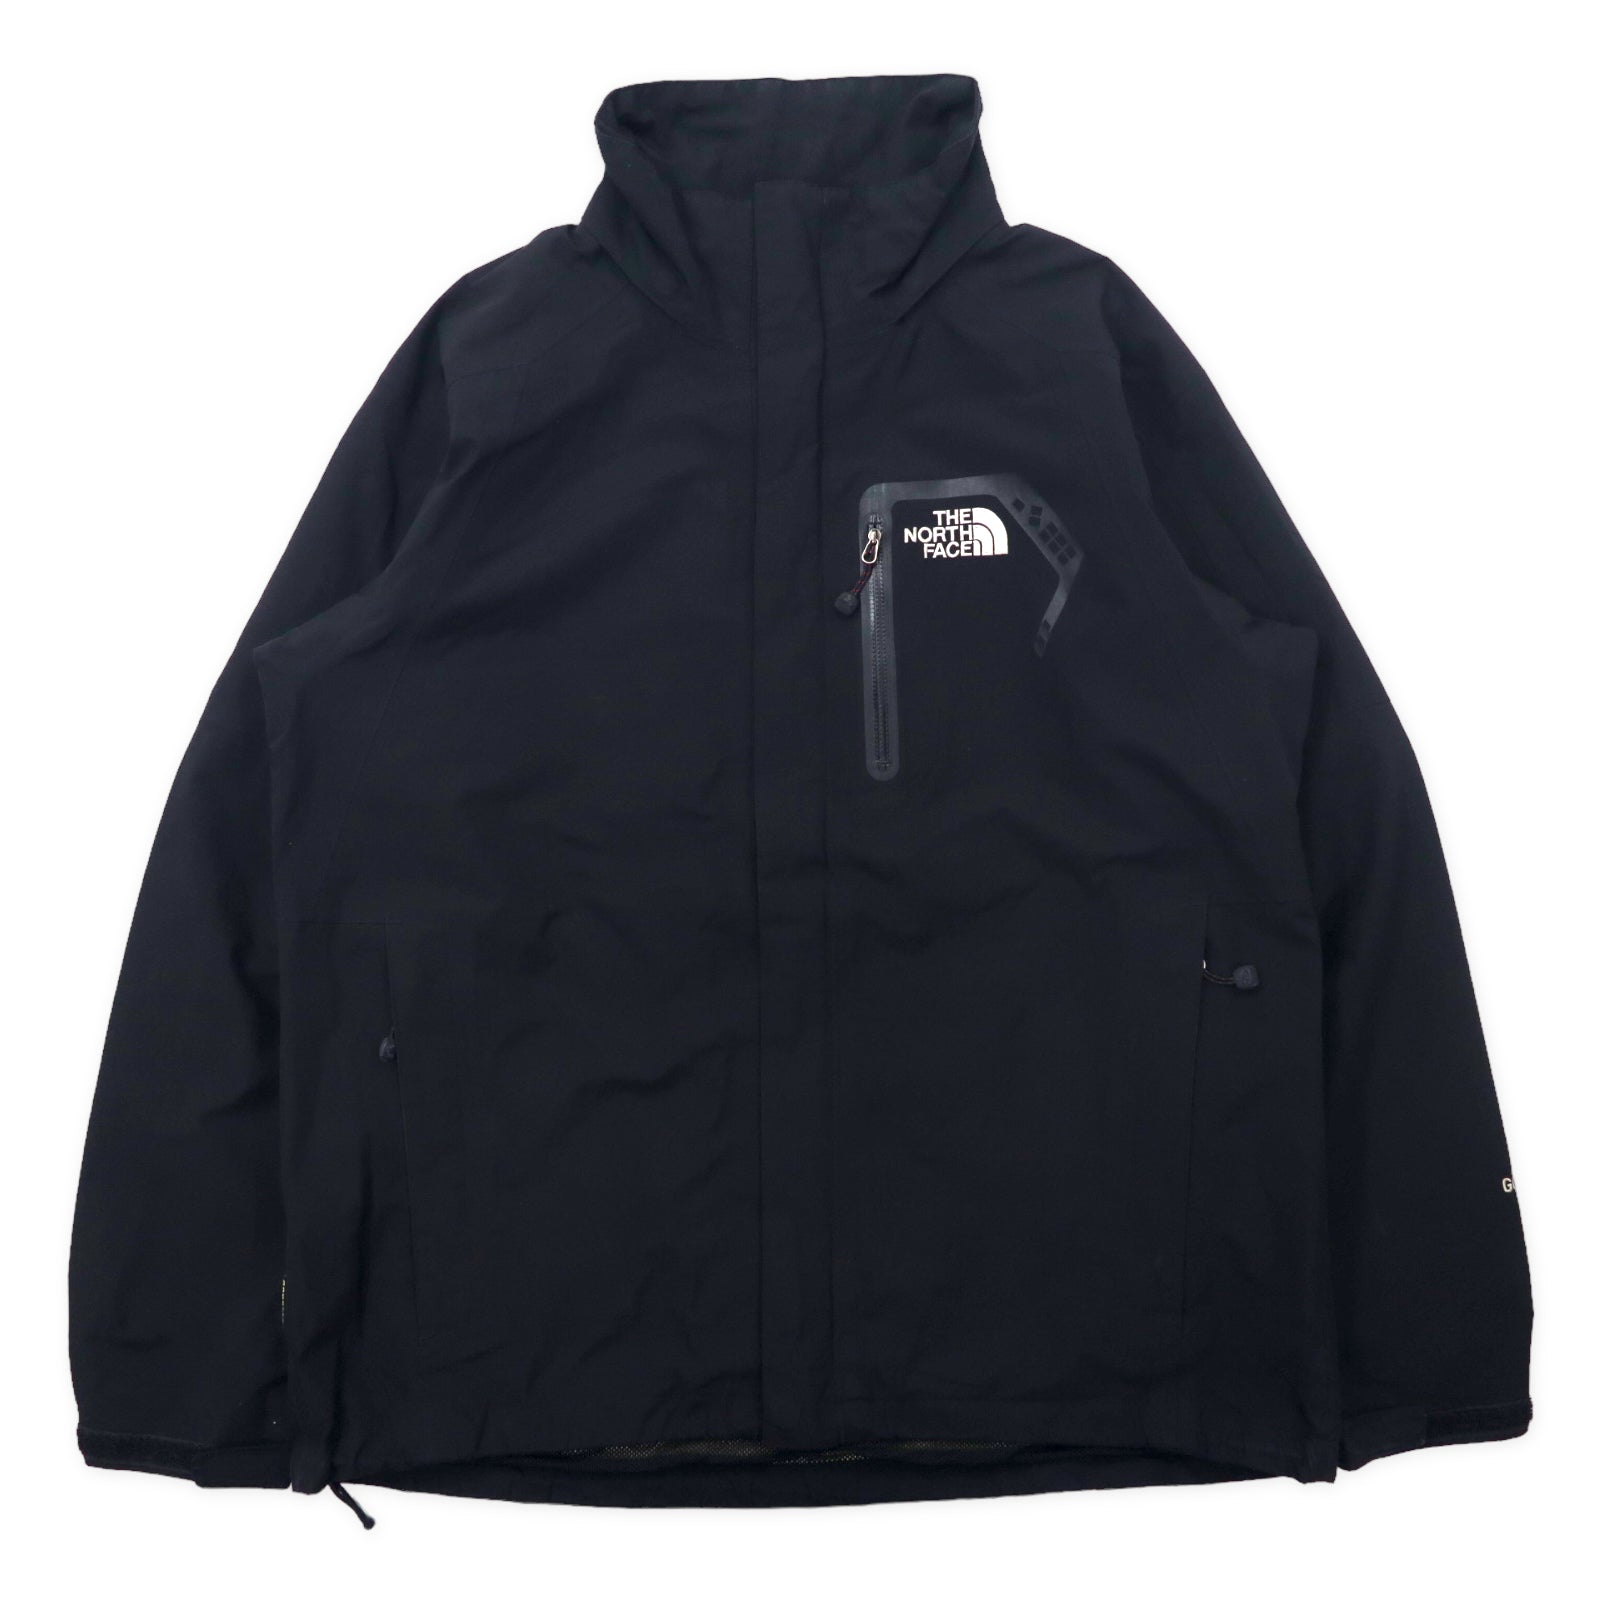 THE NORTH FACE Gore-Tex Mountain Jacket L Black GORE-TEX Double ...